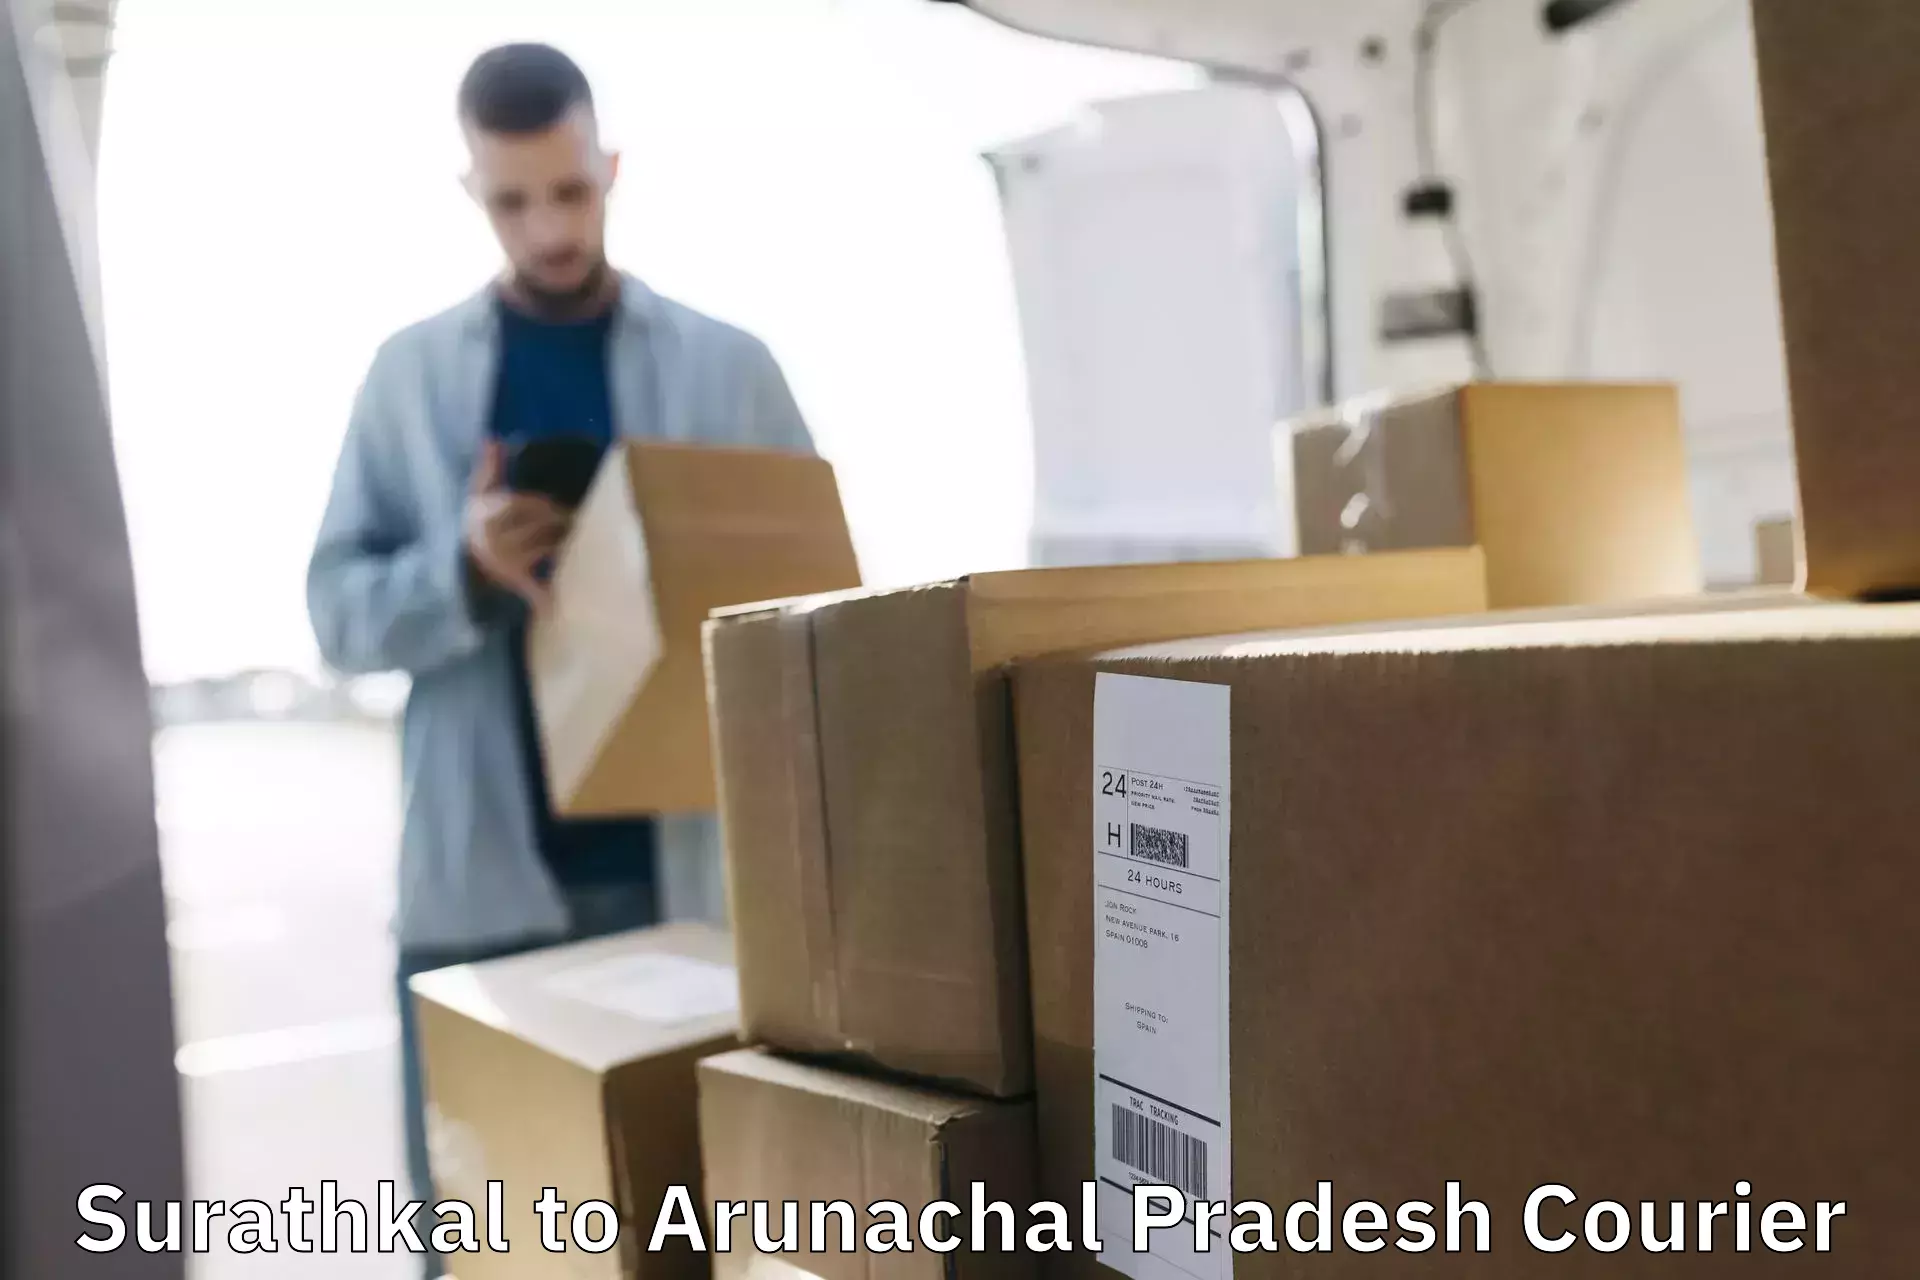 Courier app Surathkal to Deomali